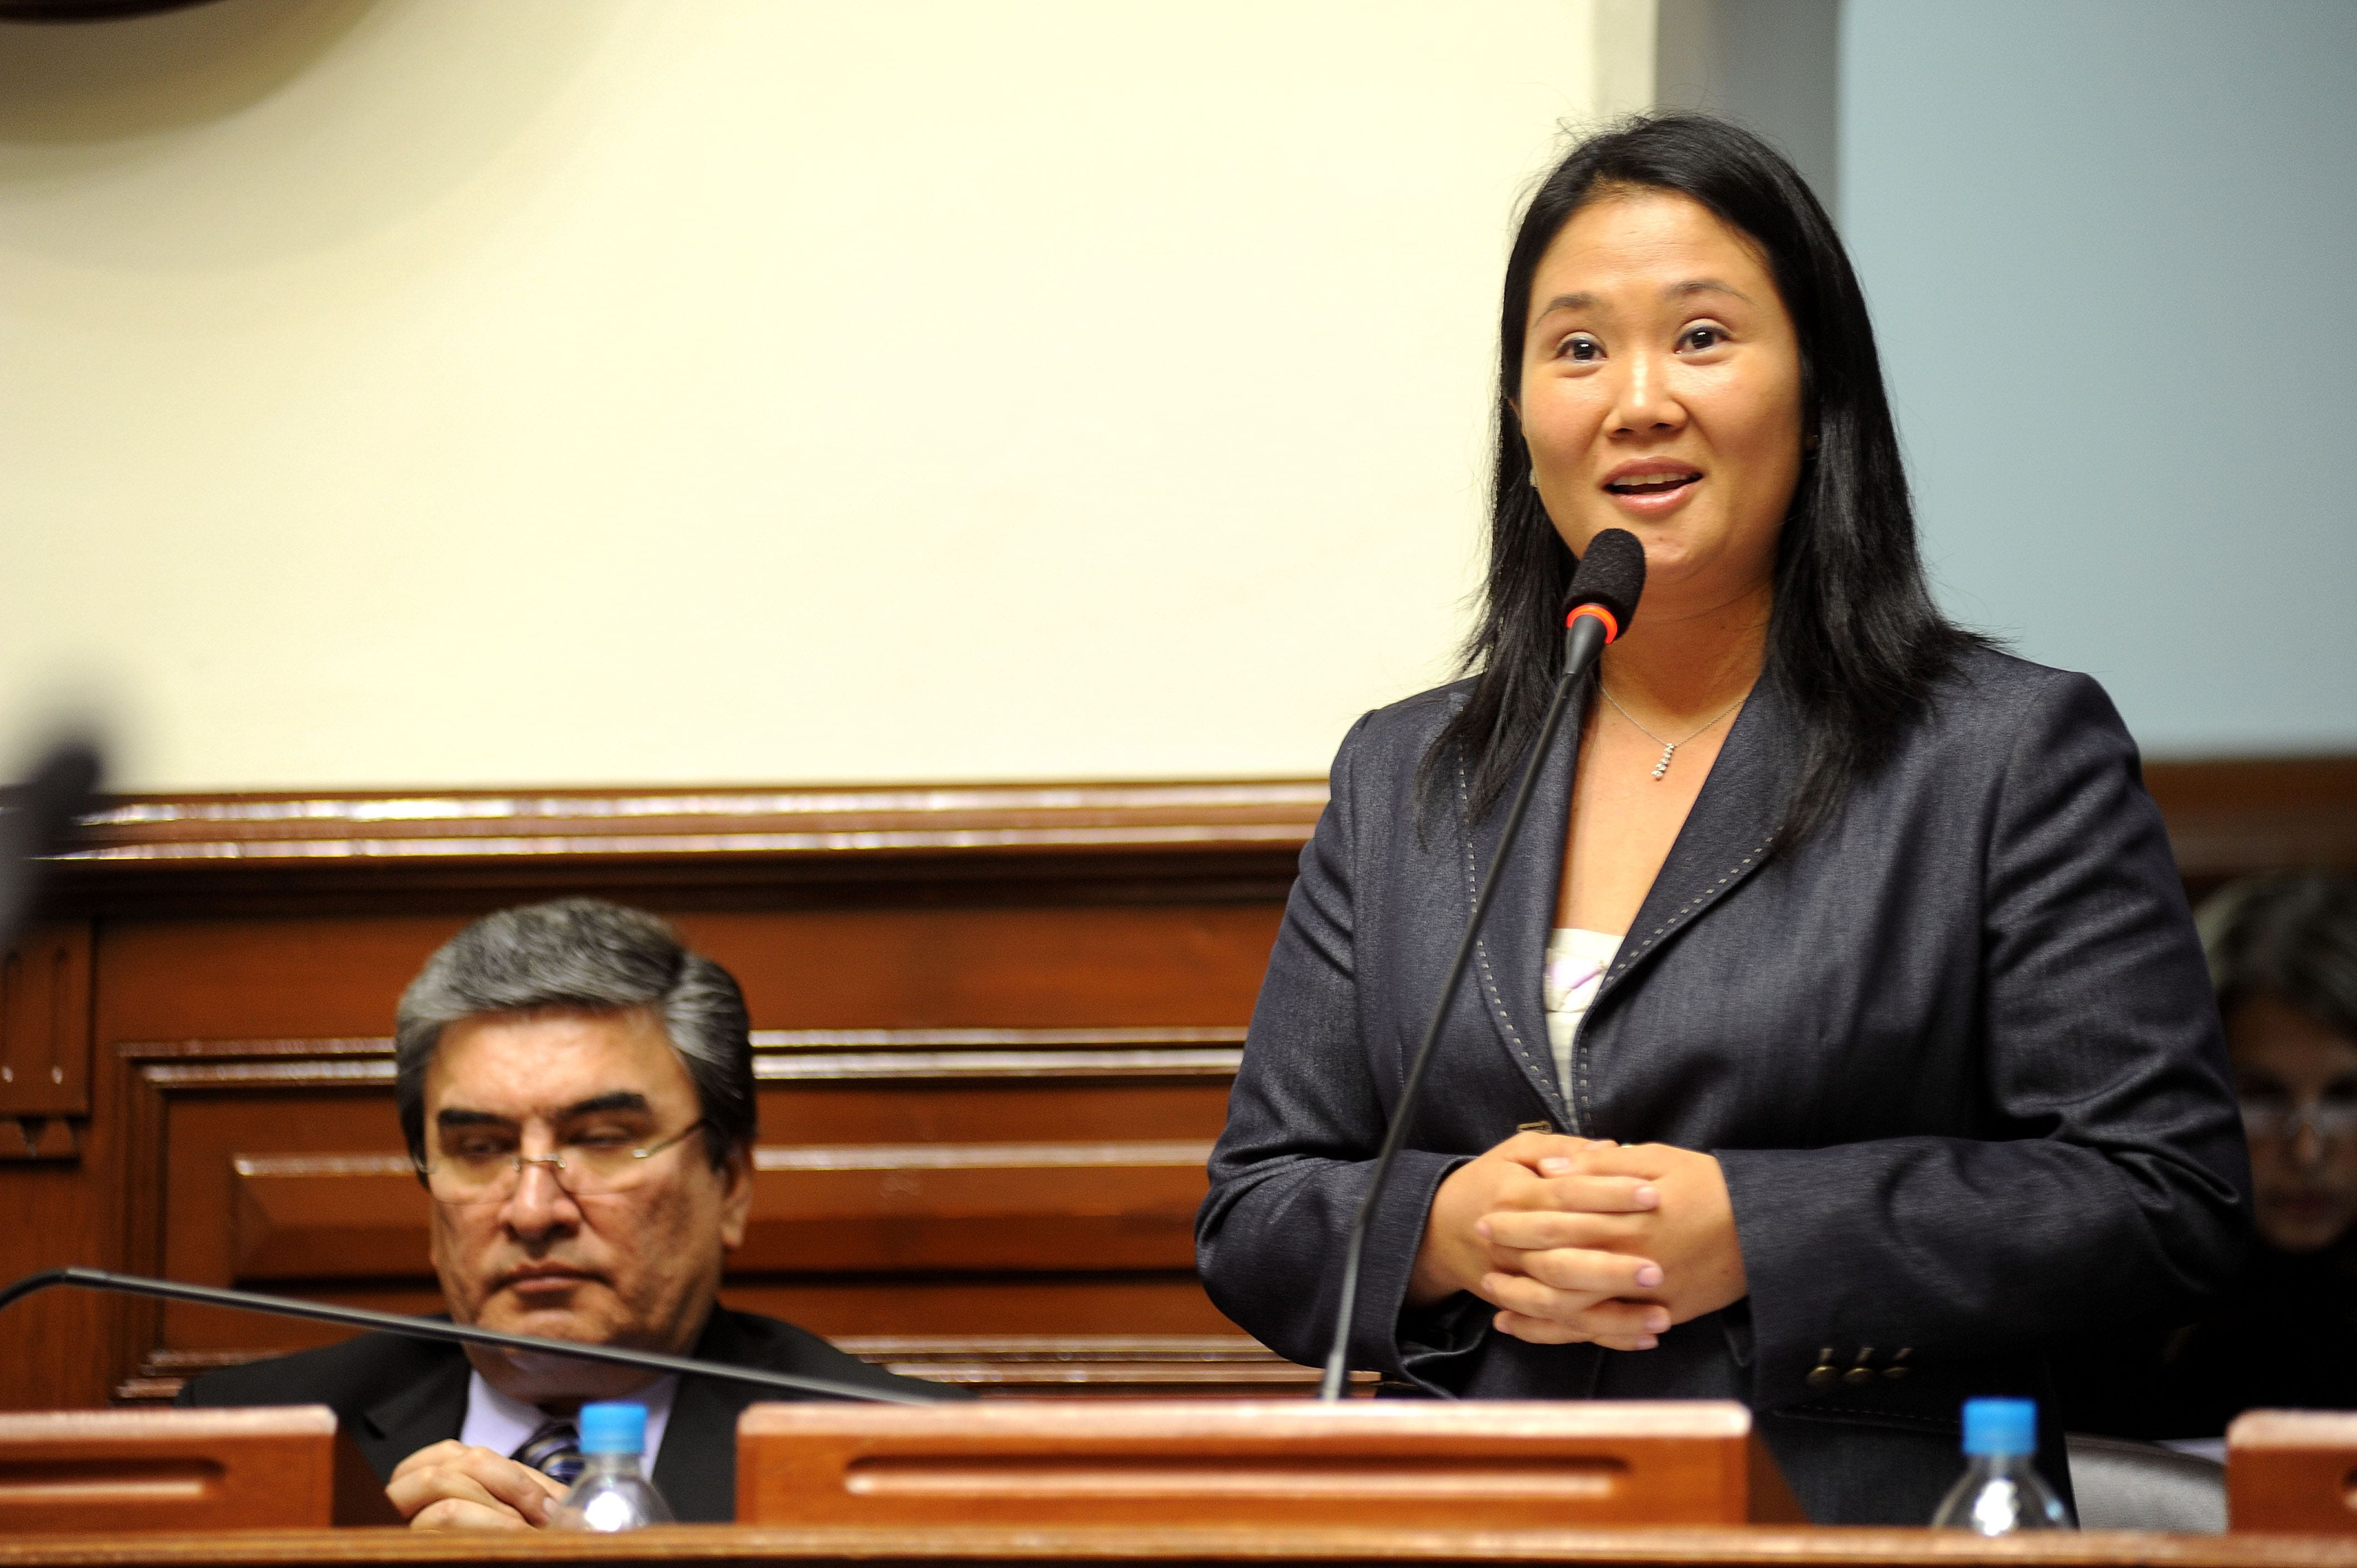 If Fujimori is declared the winner of the election, her corruption trial would be delayed until the end of her presidential term. (Source: Wikimedia Commons)